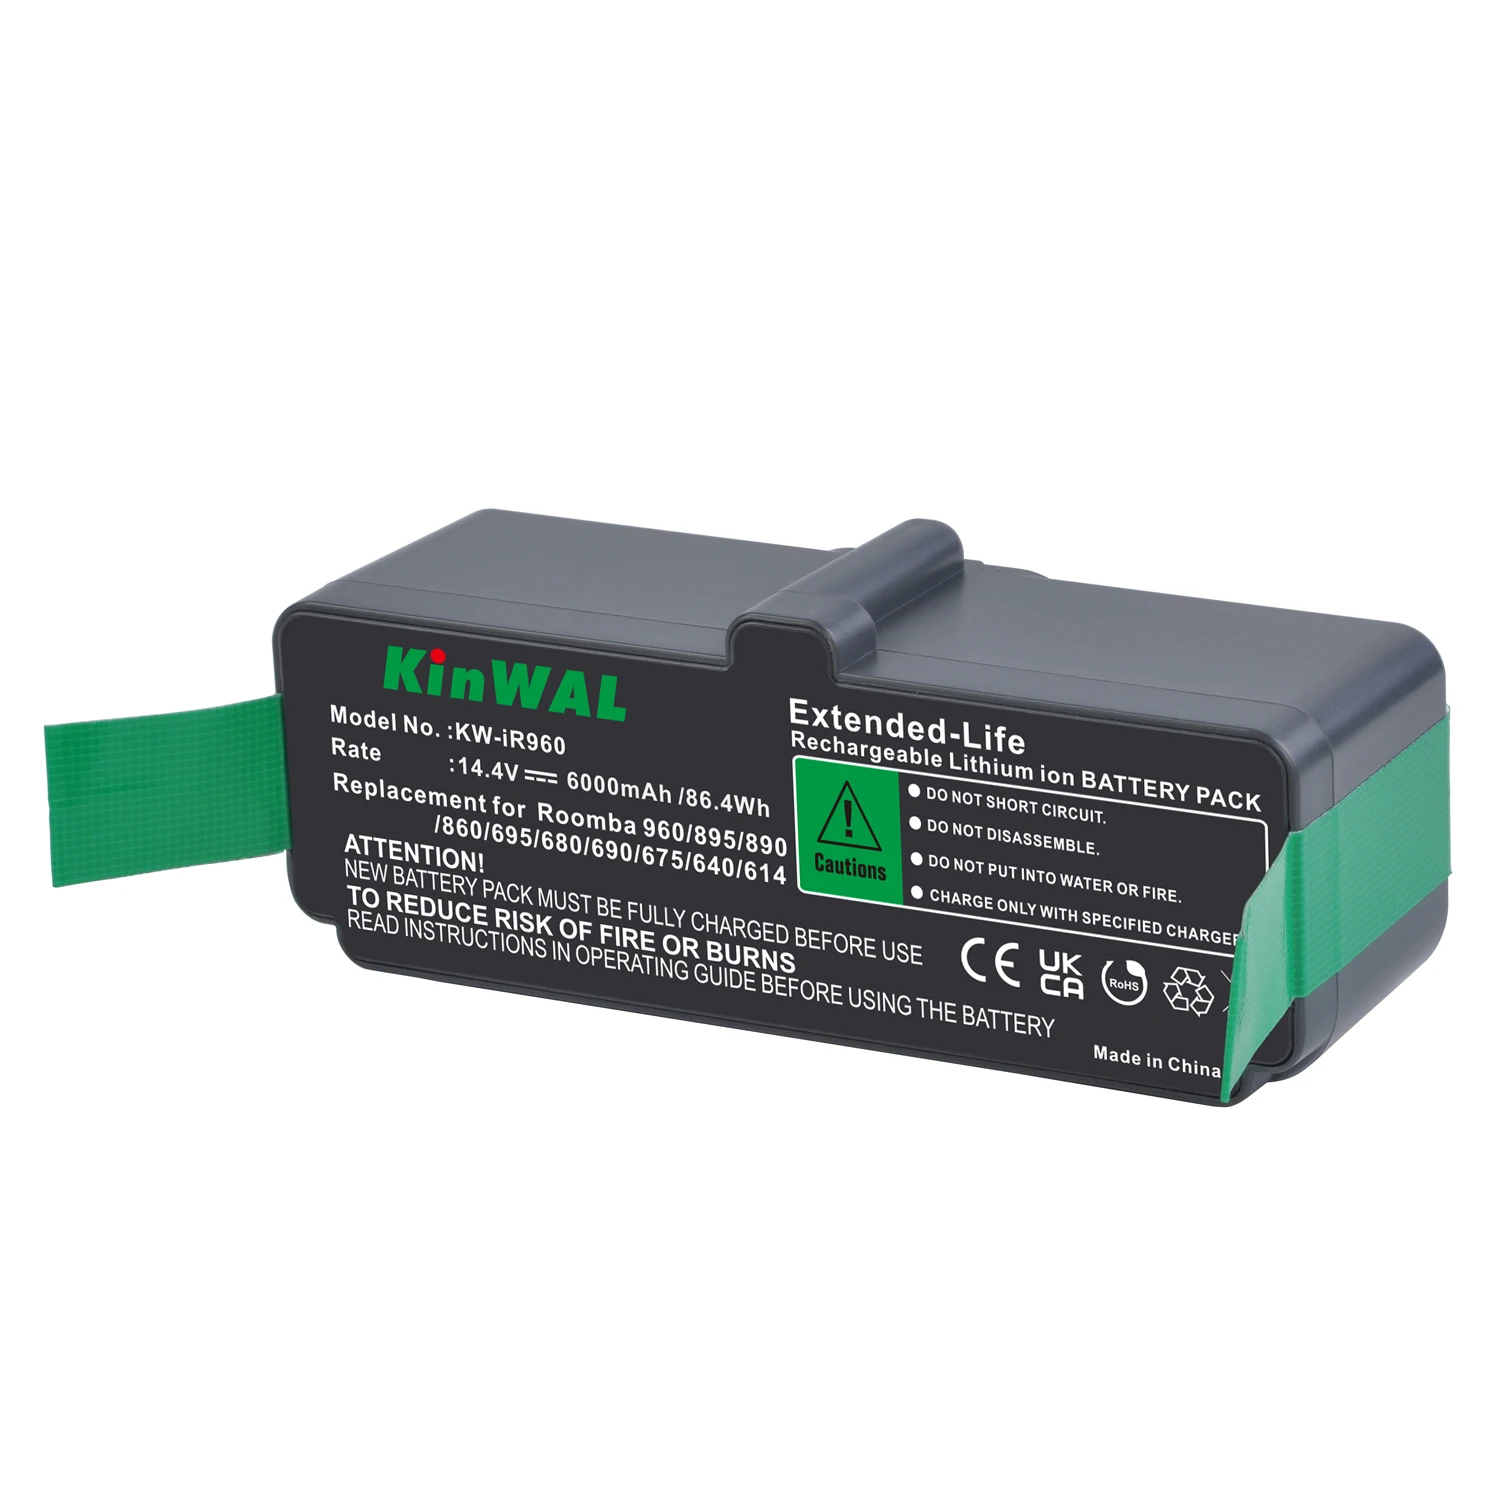 

14.4V 6000mAh Rechargeable Li-ion Battery for iRobot Roomba 960/895/890/860/695/680/690/675/640/614 Series Vacuum Cleaners